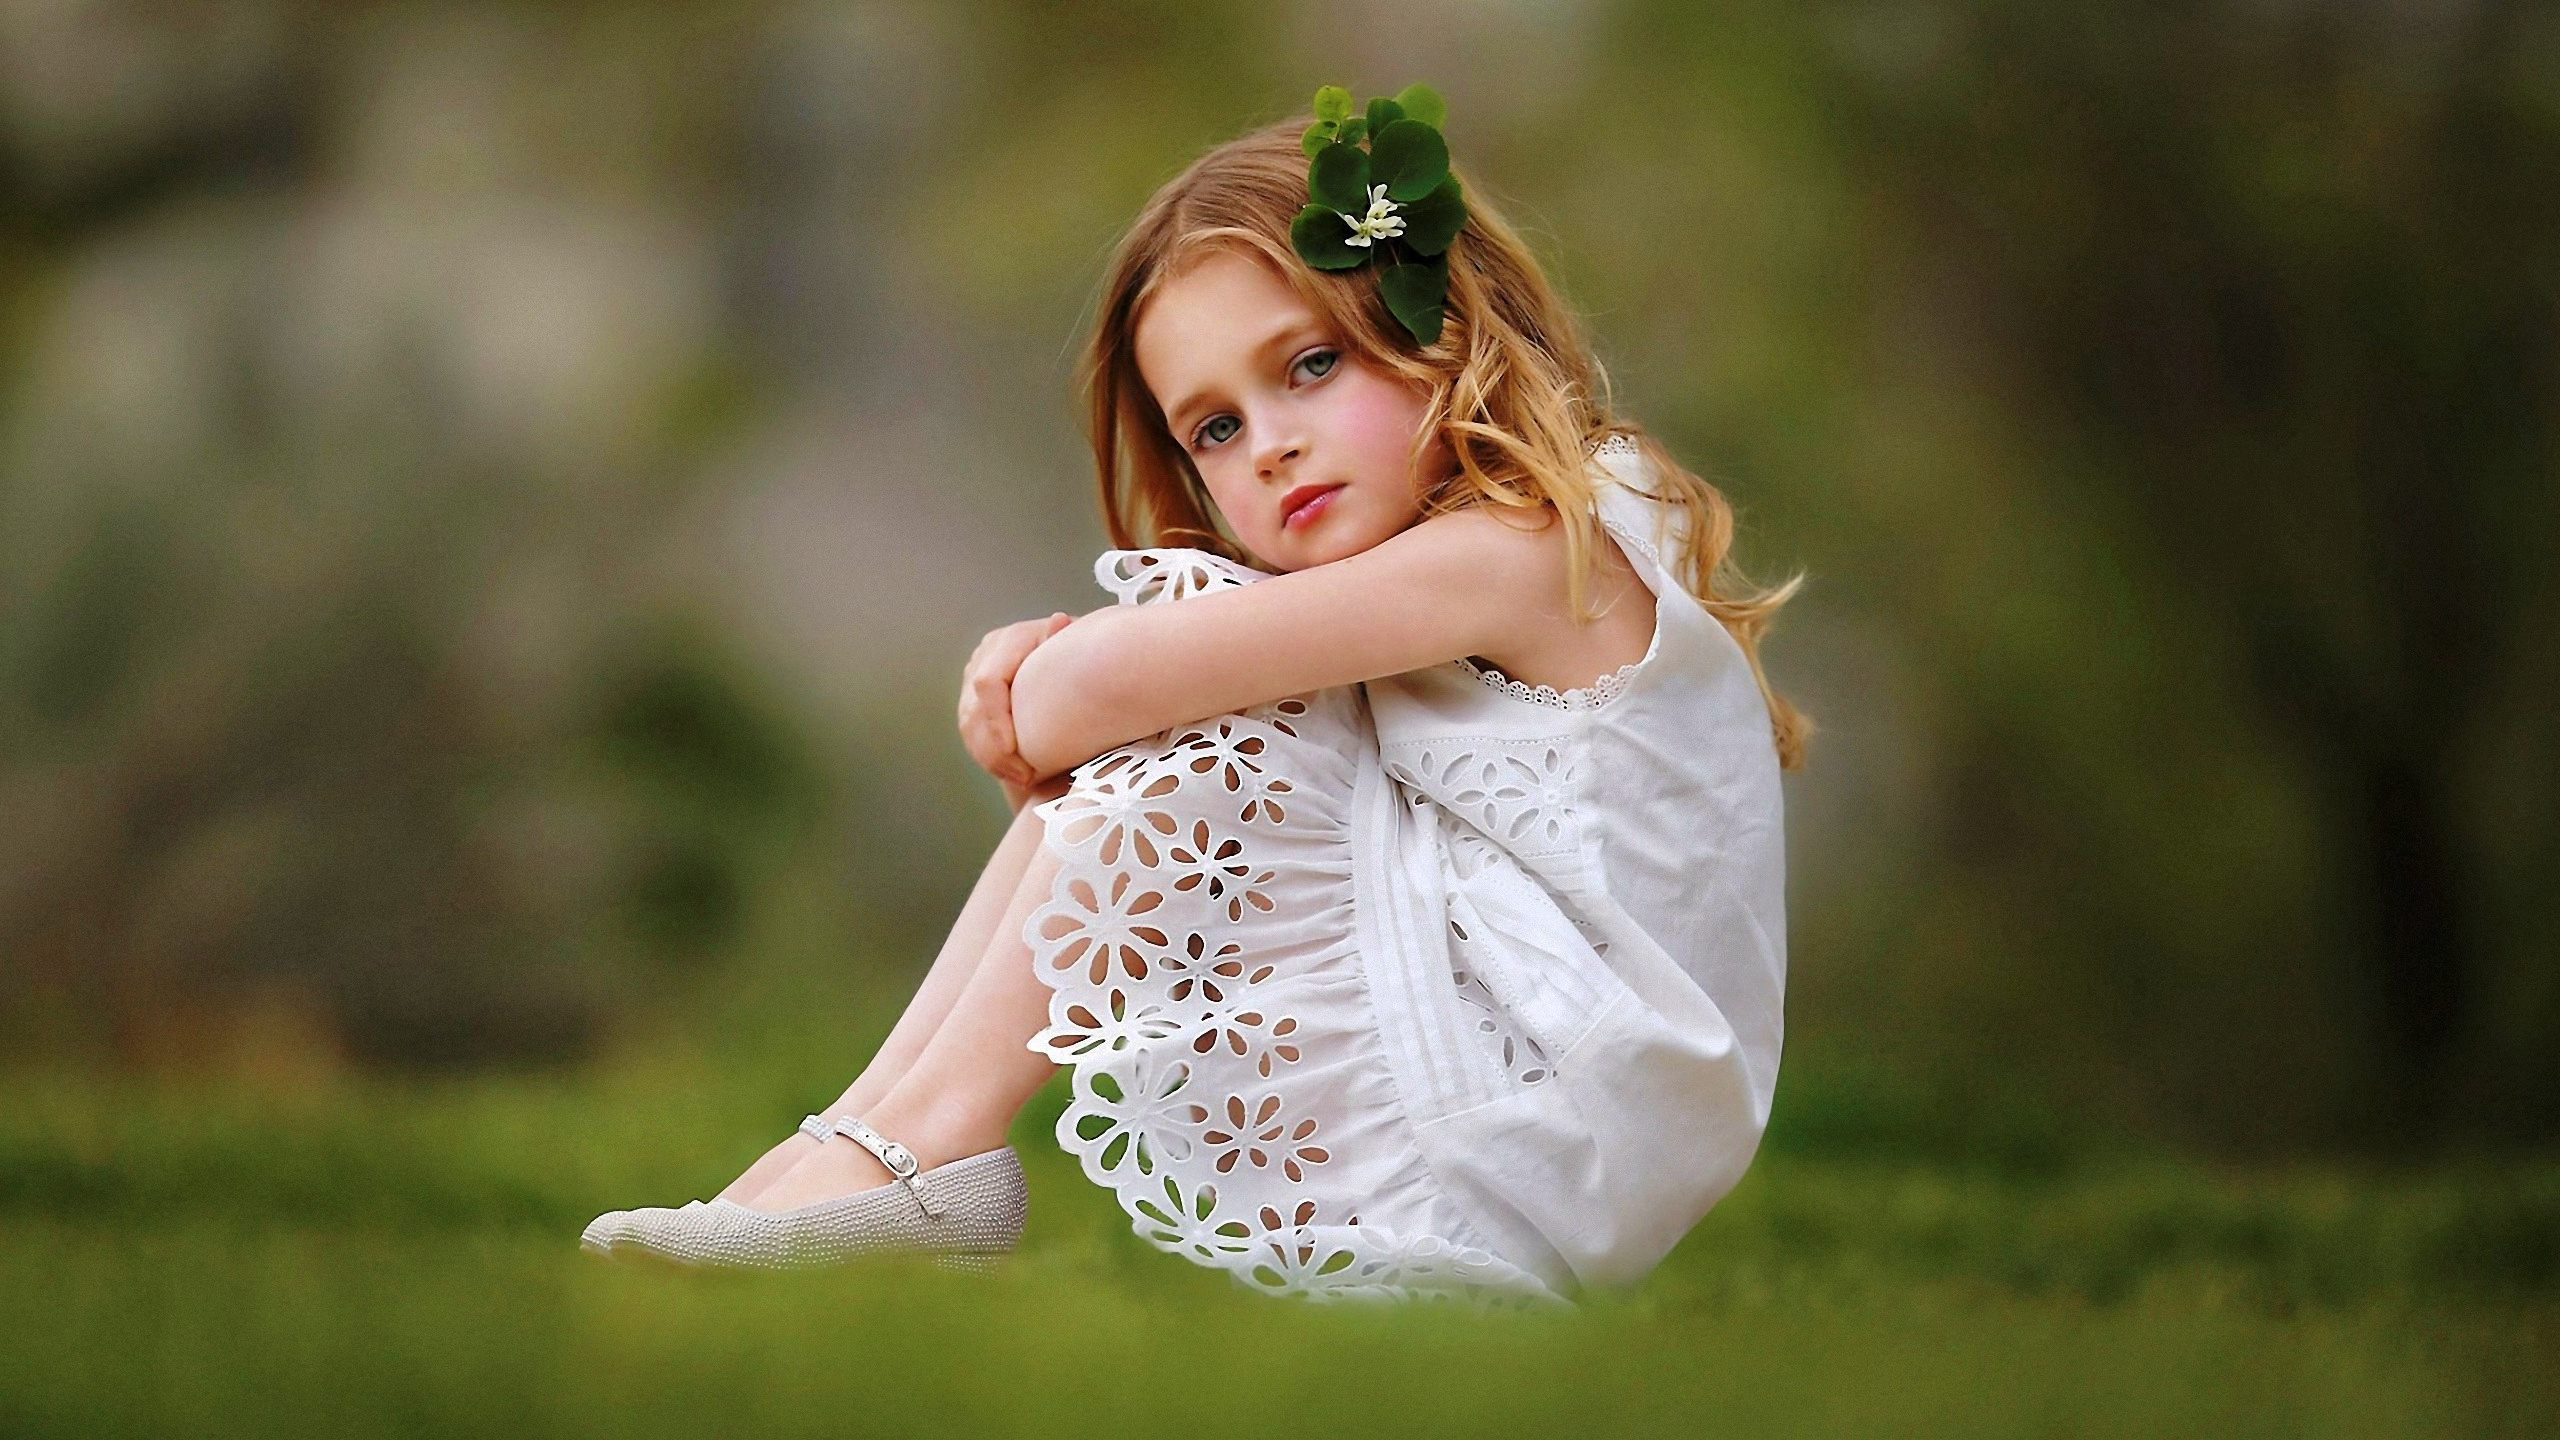 Cute Girl Baby Is Wearing White Dress Sitting On Grass Facing One Side And Having Green Leaves On Head In A Blur Background HD Cute